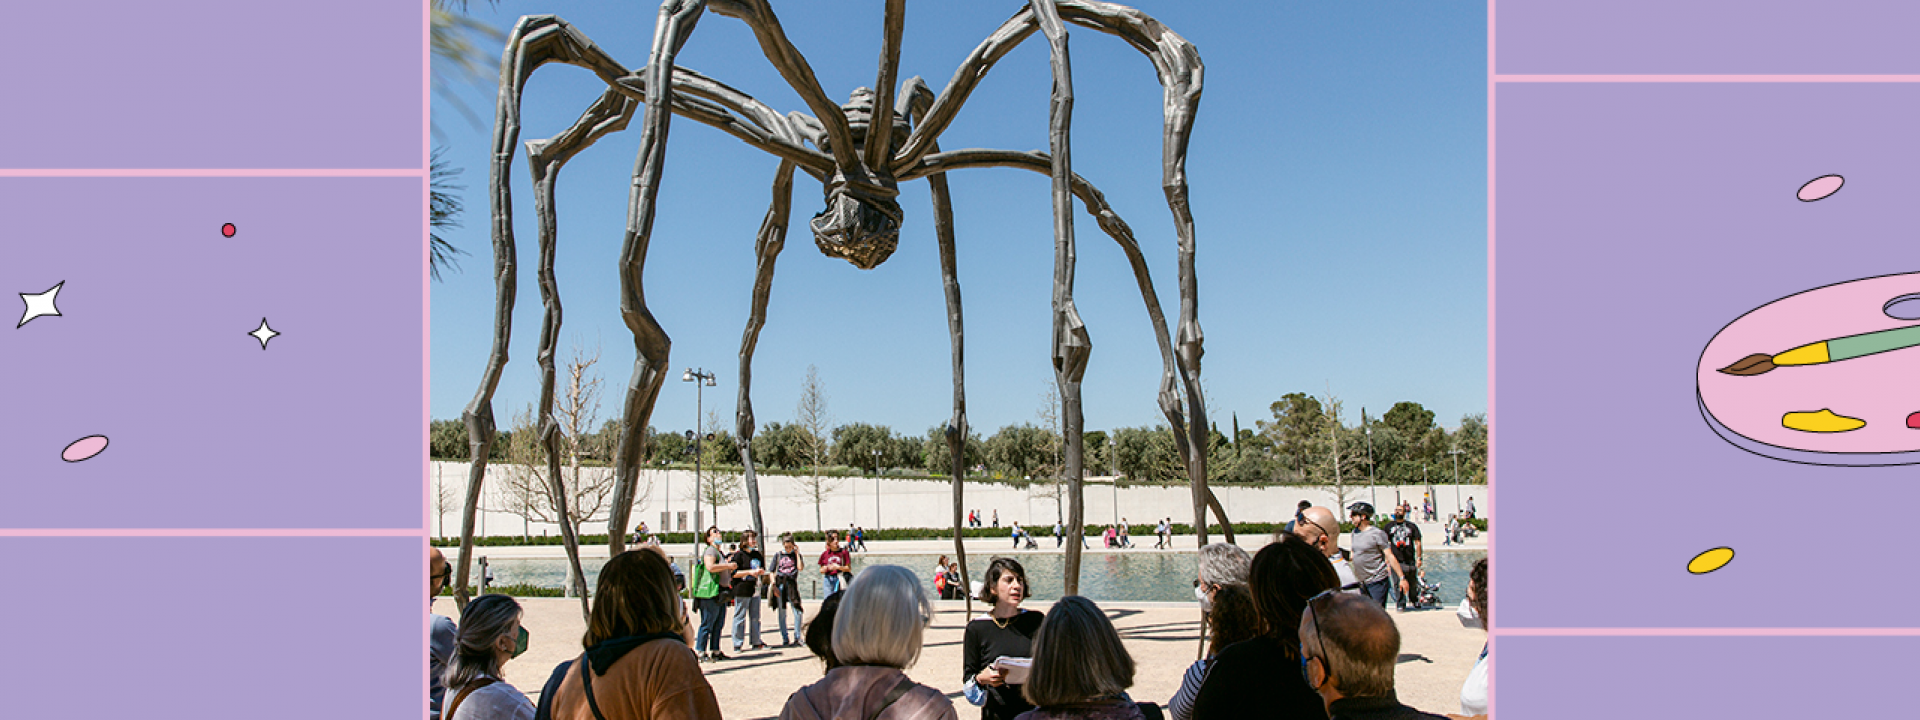 SNFCC Μembers’ Last Look at the Art Installation Maman | Exclusive tour by Galini Notti - Εικόνα